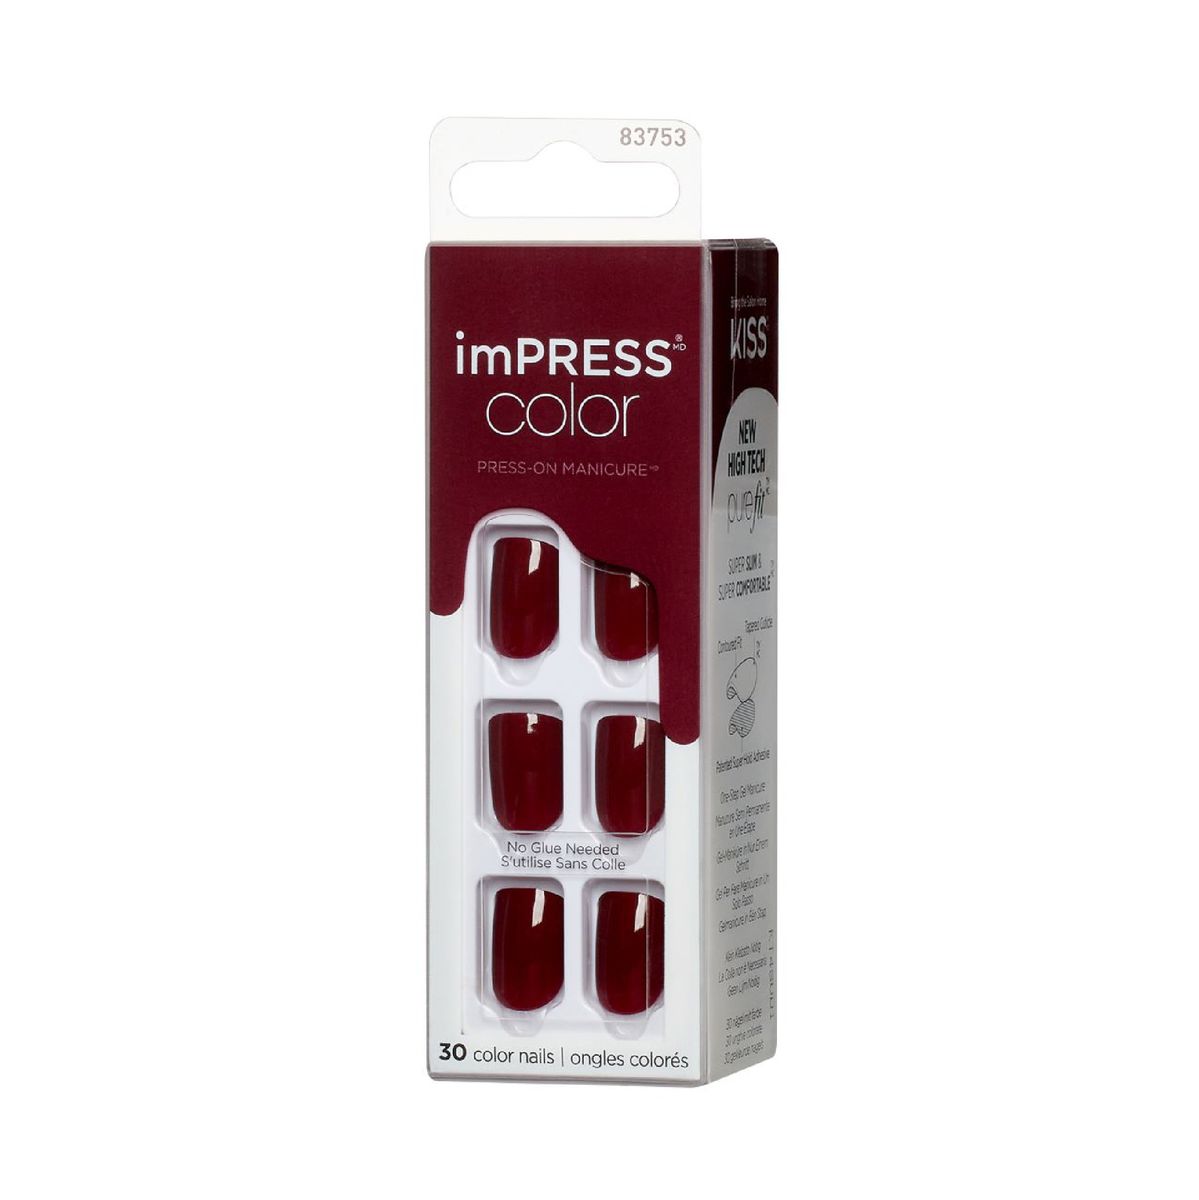 Kiss Impress Nails Colour Im Not a Cinna | Buy Online in South Africa |  